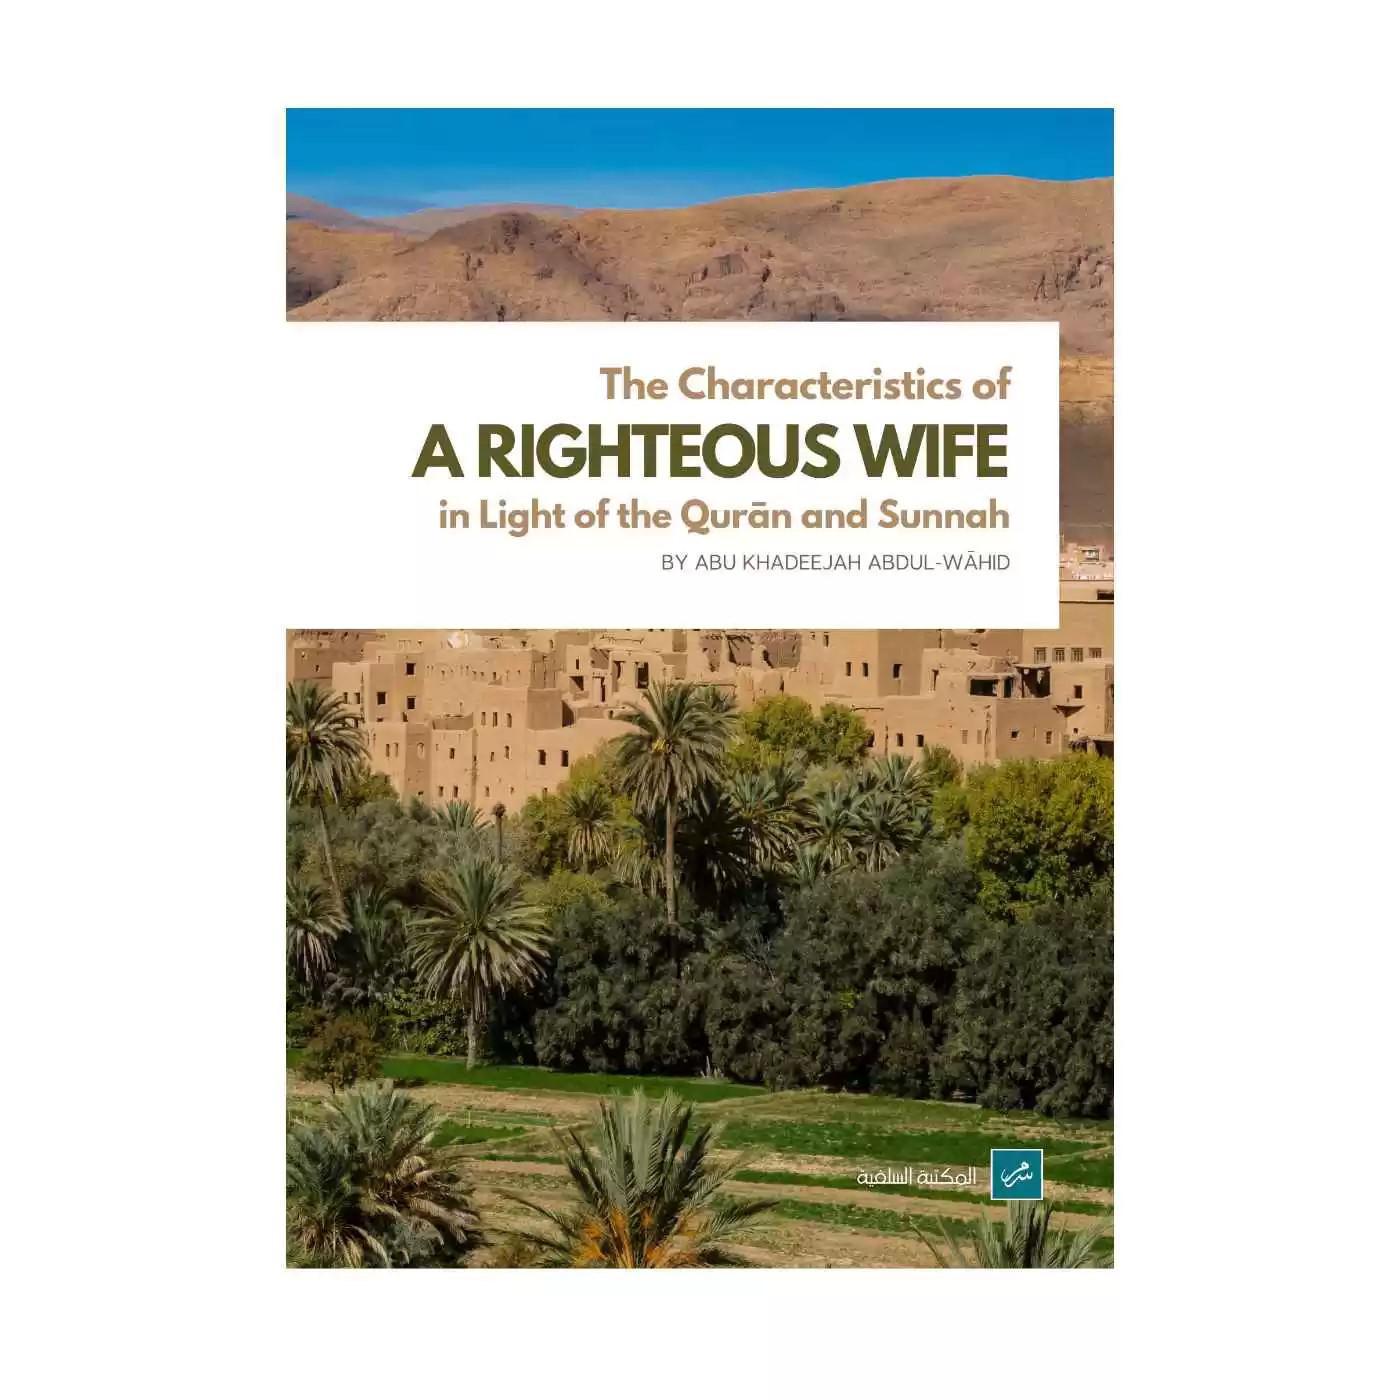 The Characteristics Of A Righteous Wife In Light Of The Quran And Sunnah